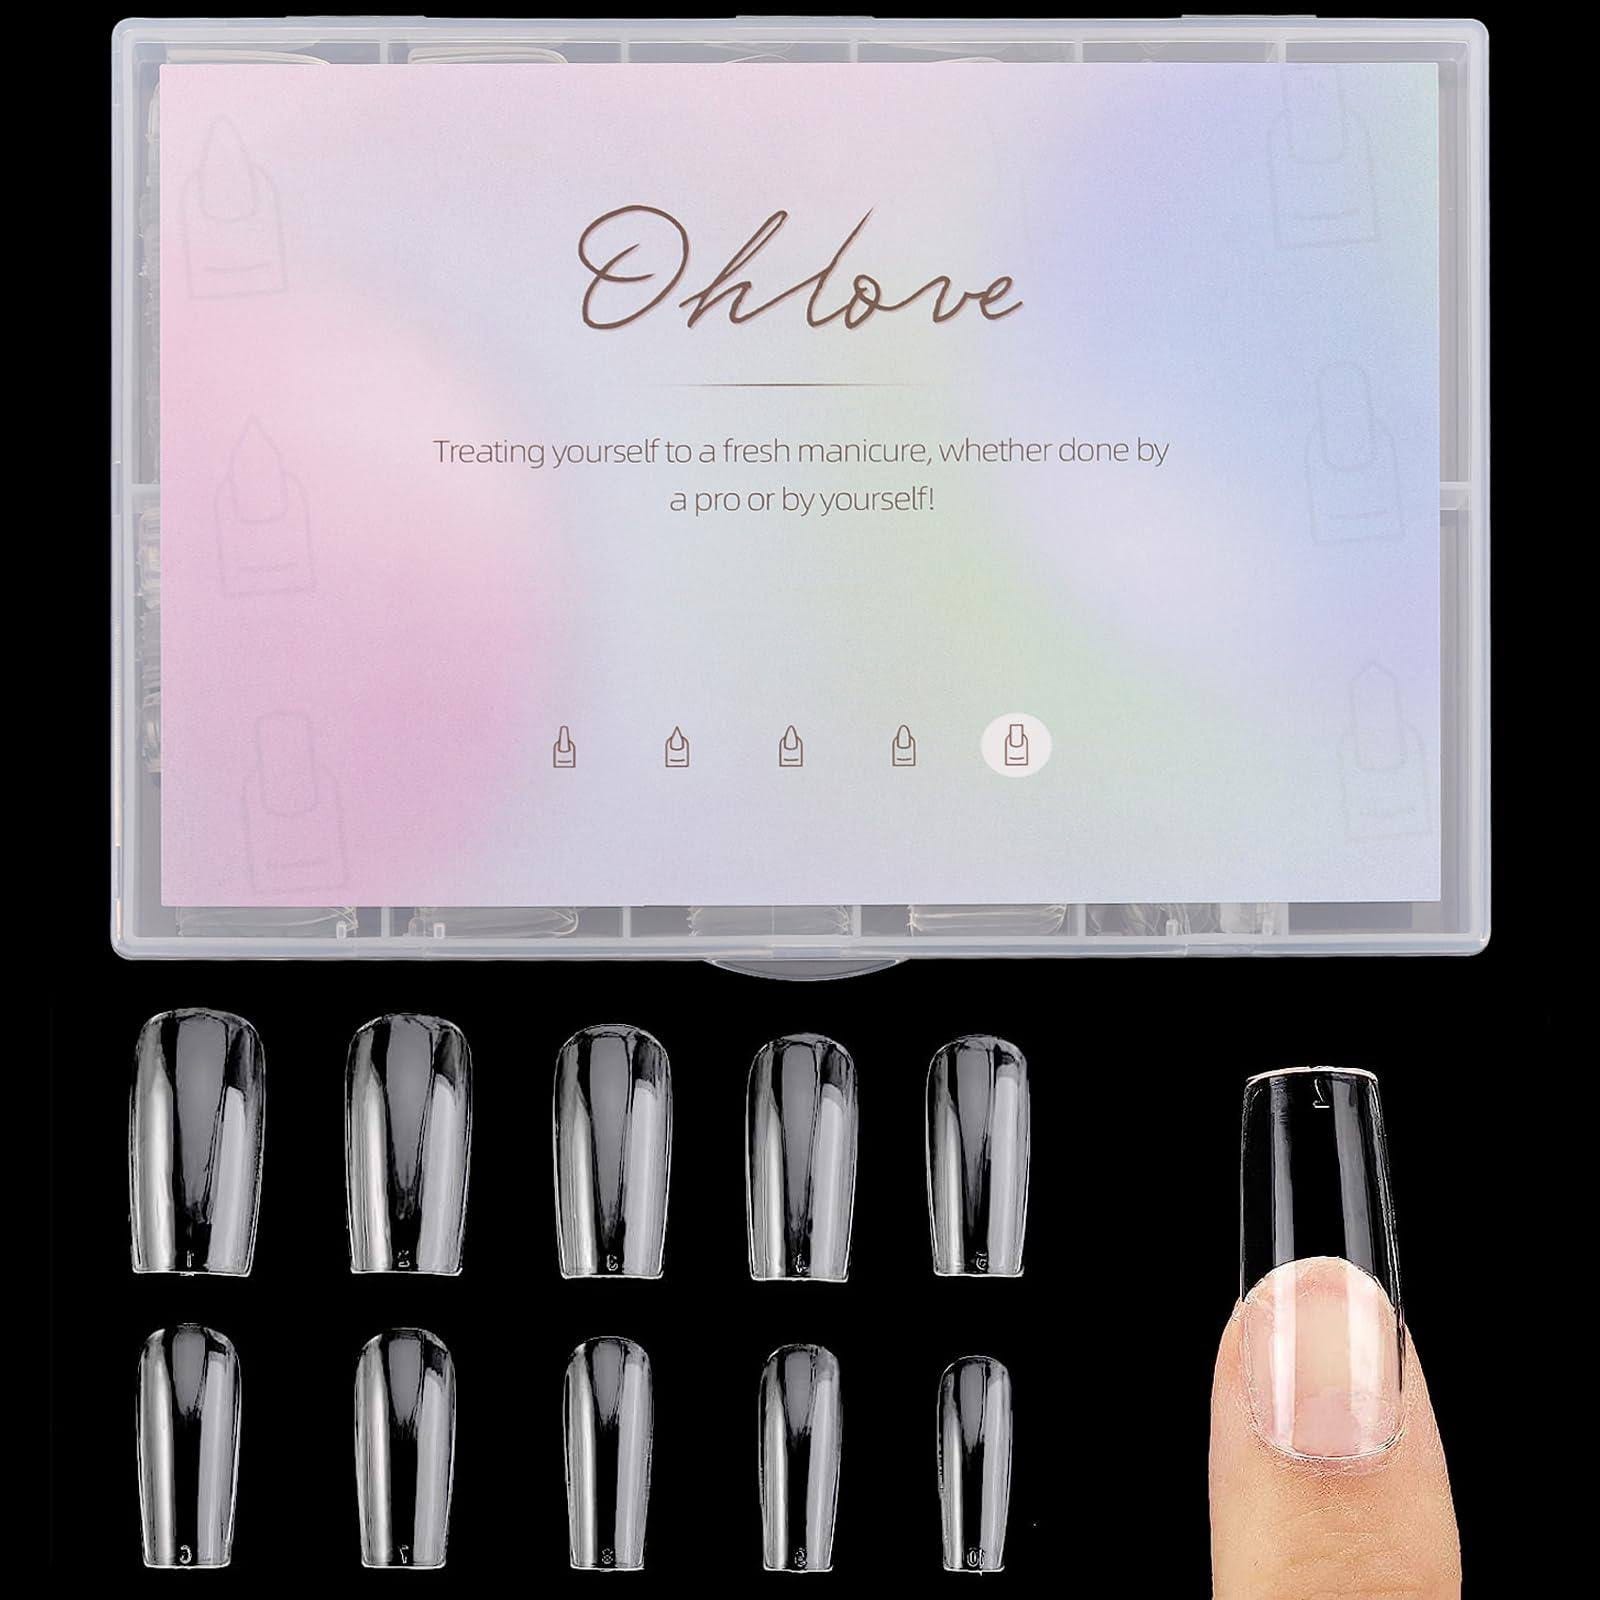 Ohlove's 500-piece Clear Acrylic Nails Set in Sizes 1-10 | Image